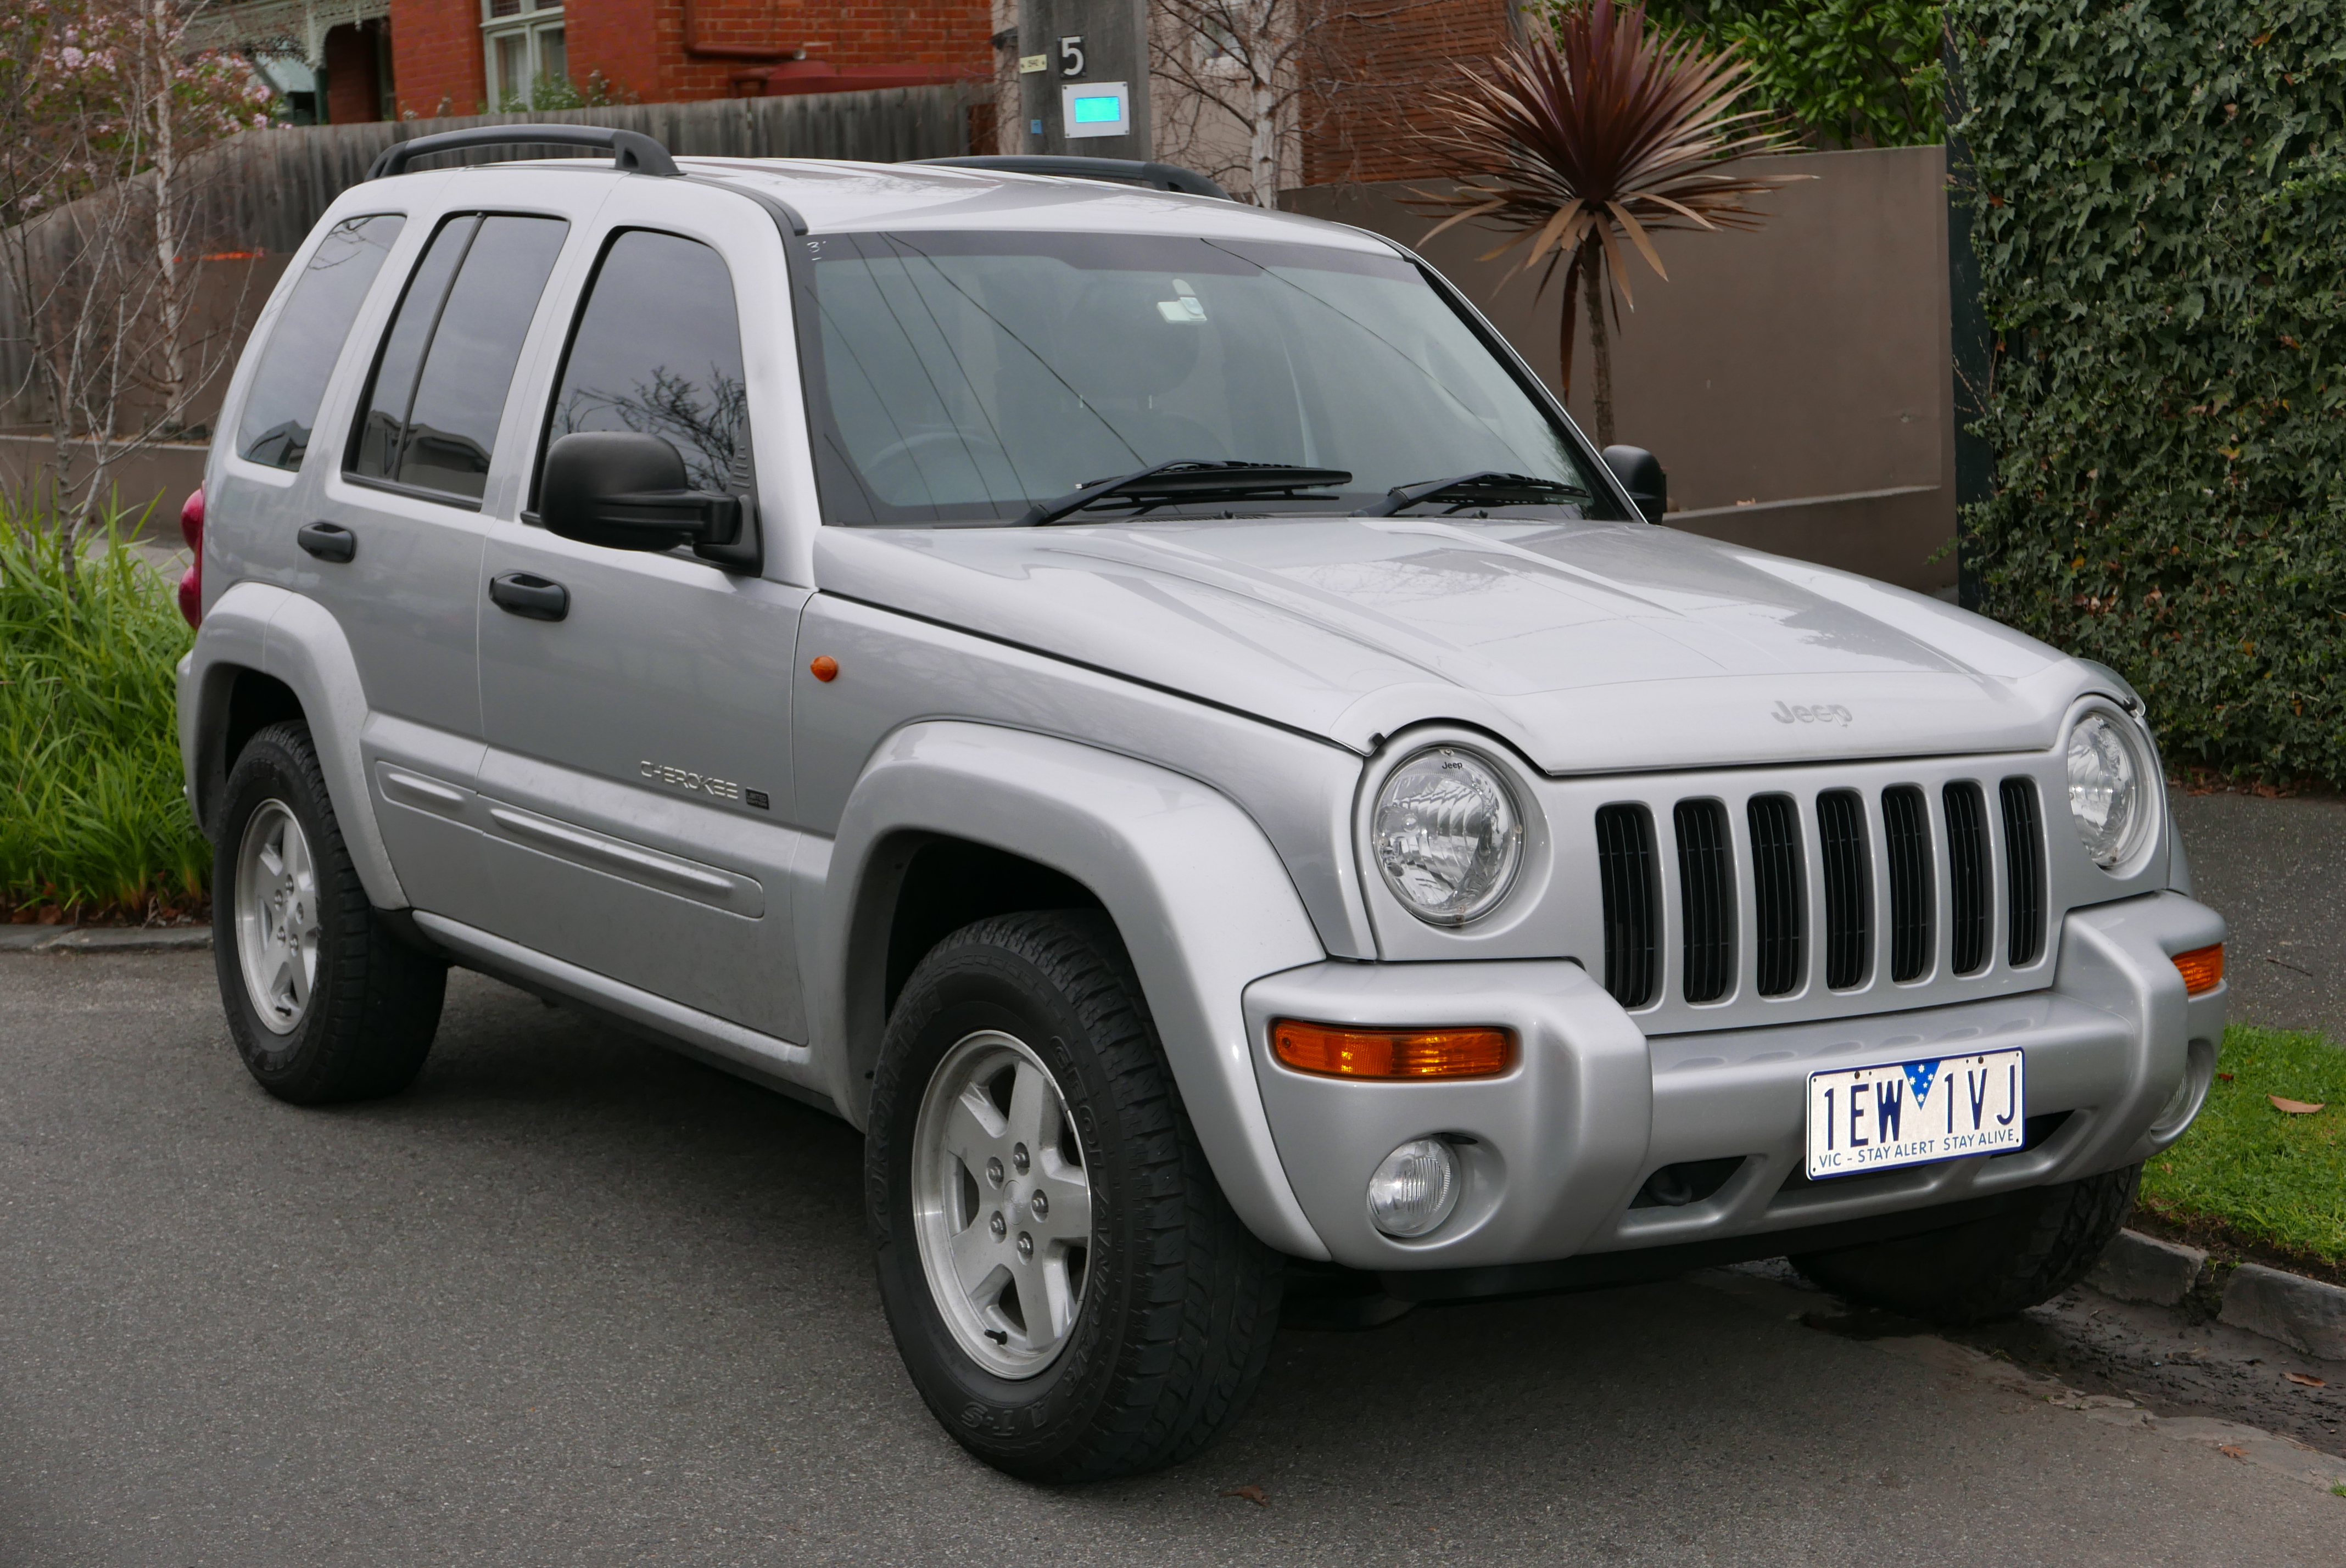 2002 jeep liberty owners manual online